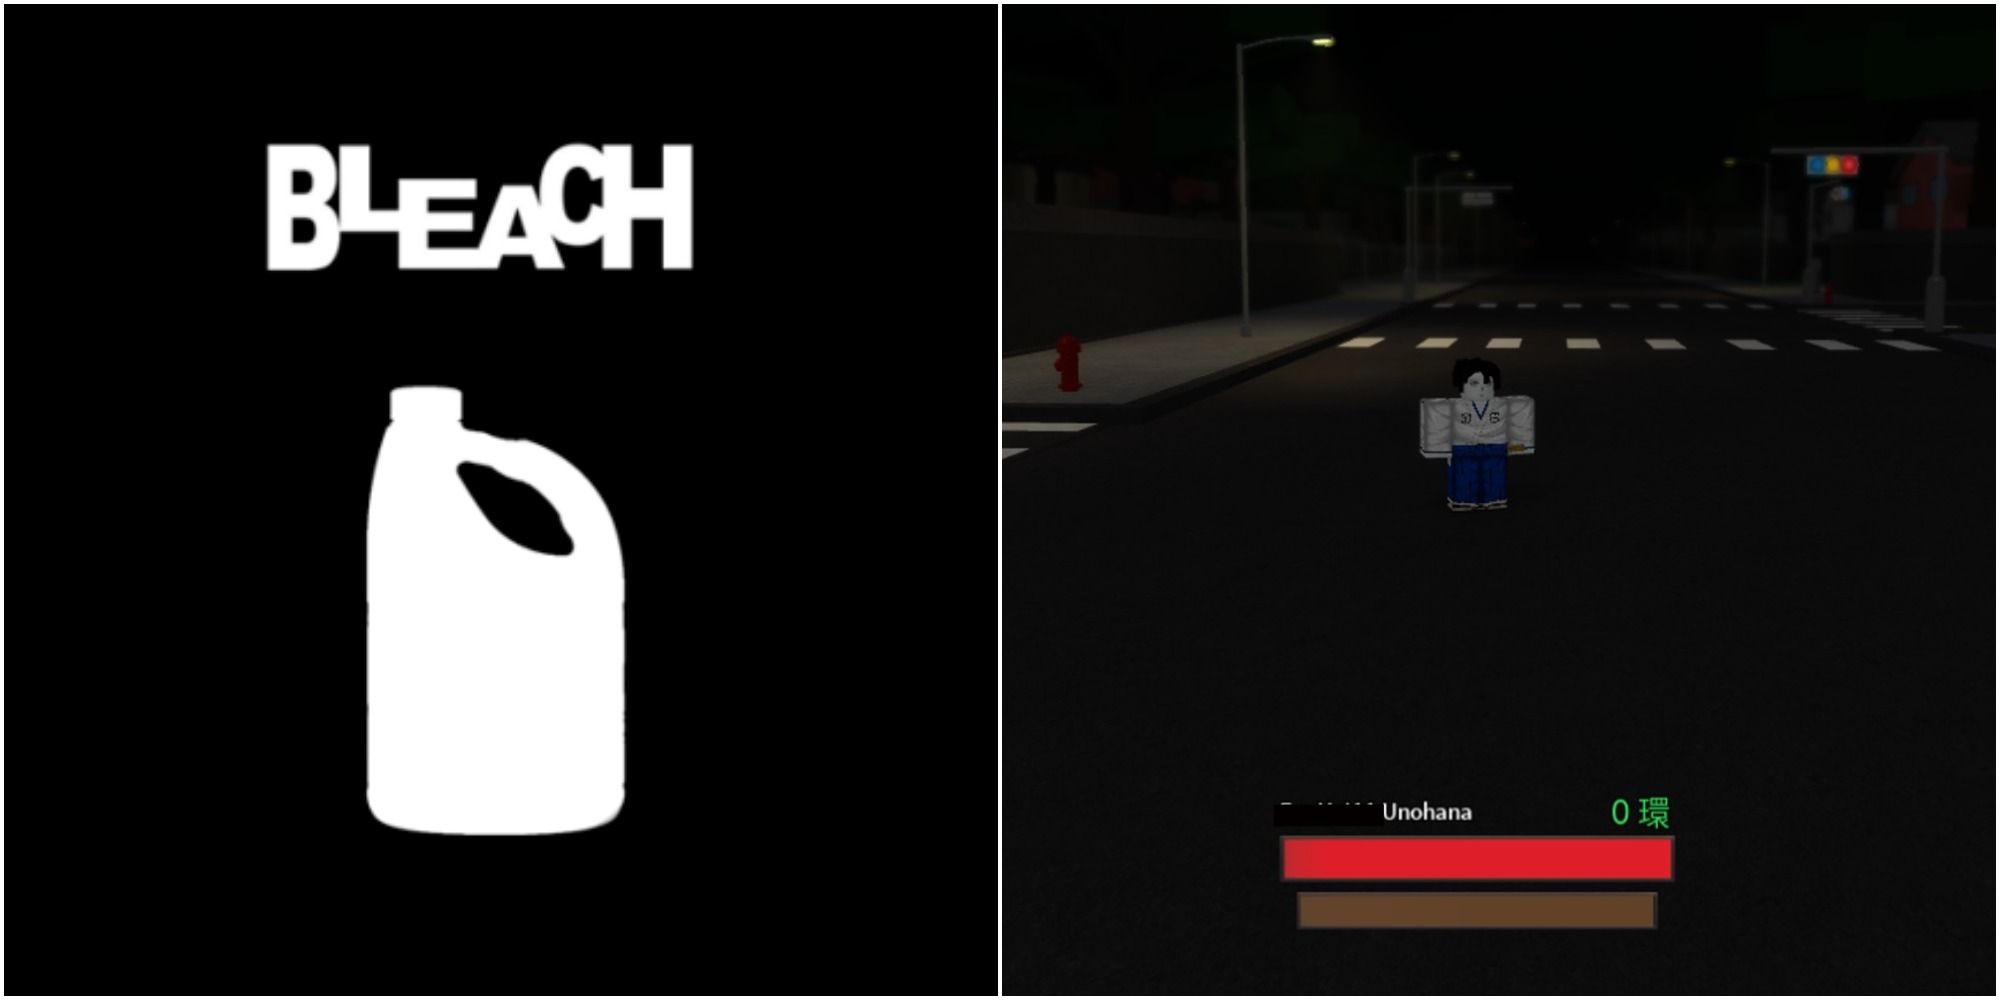 toxic bleach header art and character roblox